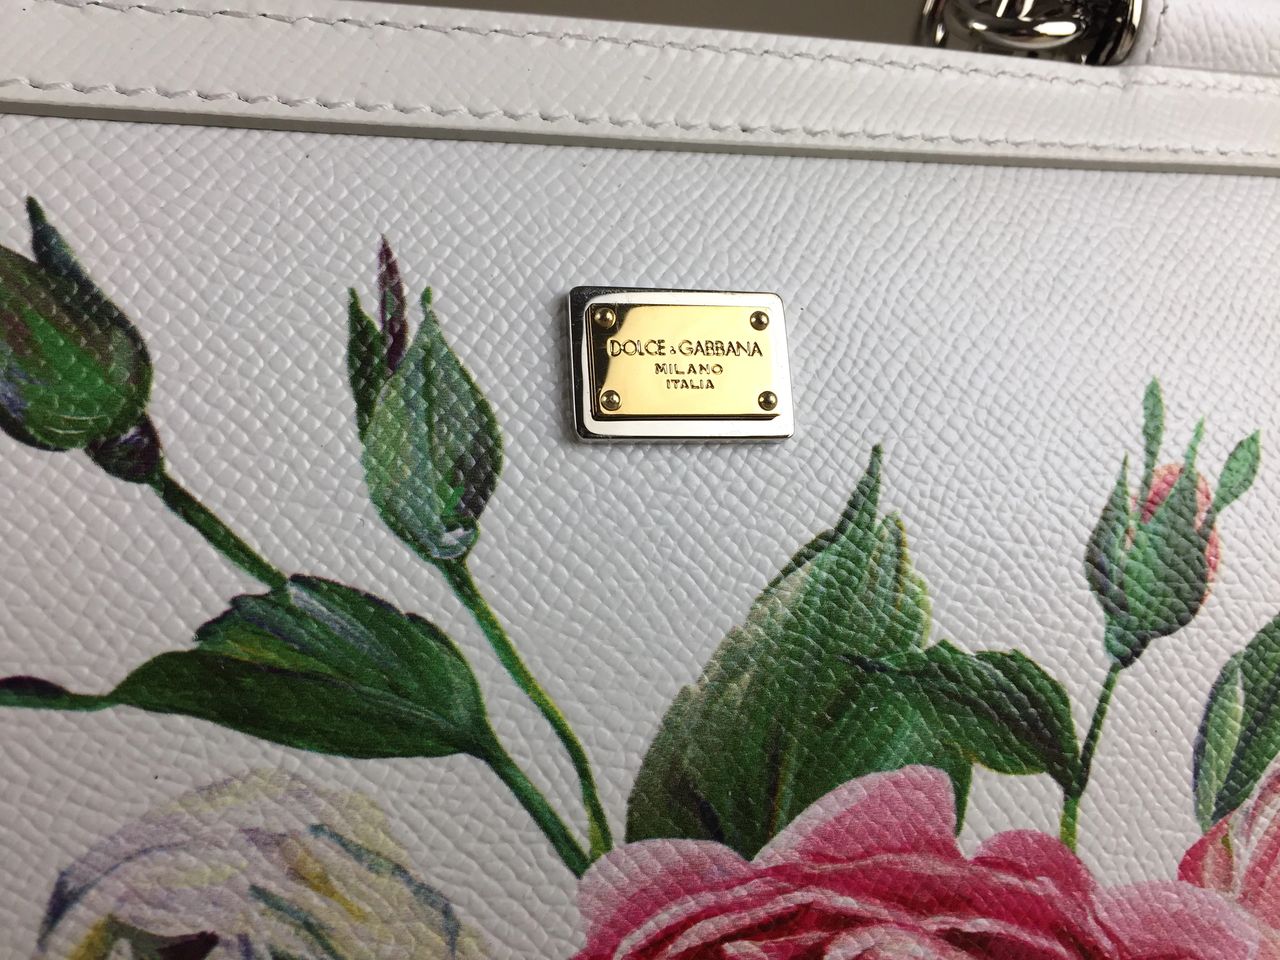 Engraving of the authentic DOLCE & GABBANA bag is very neat, the color is naturally gold